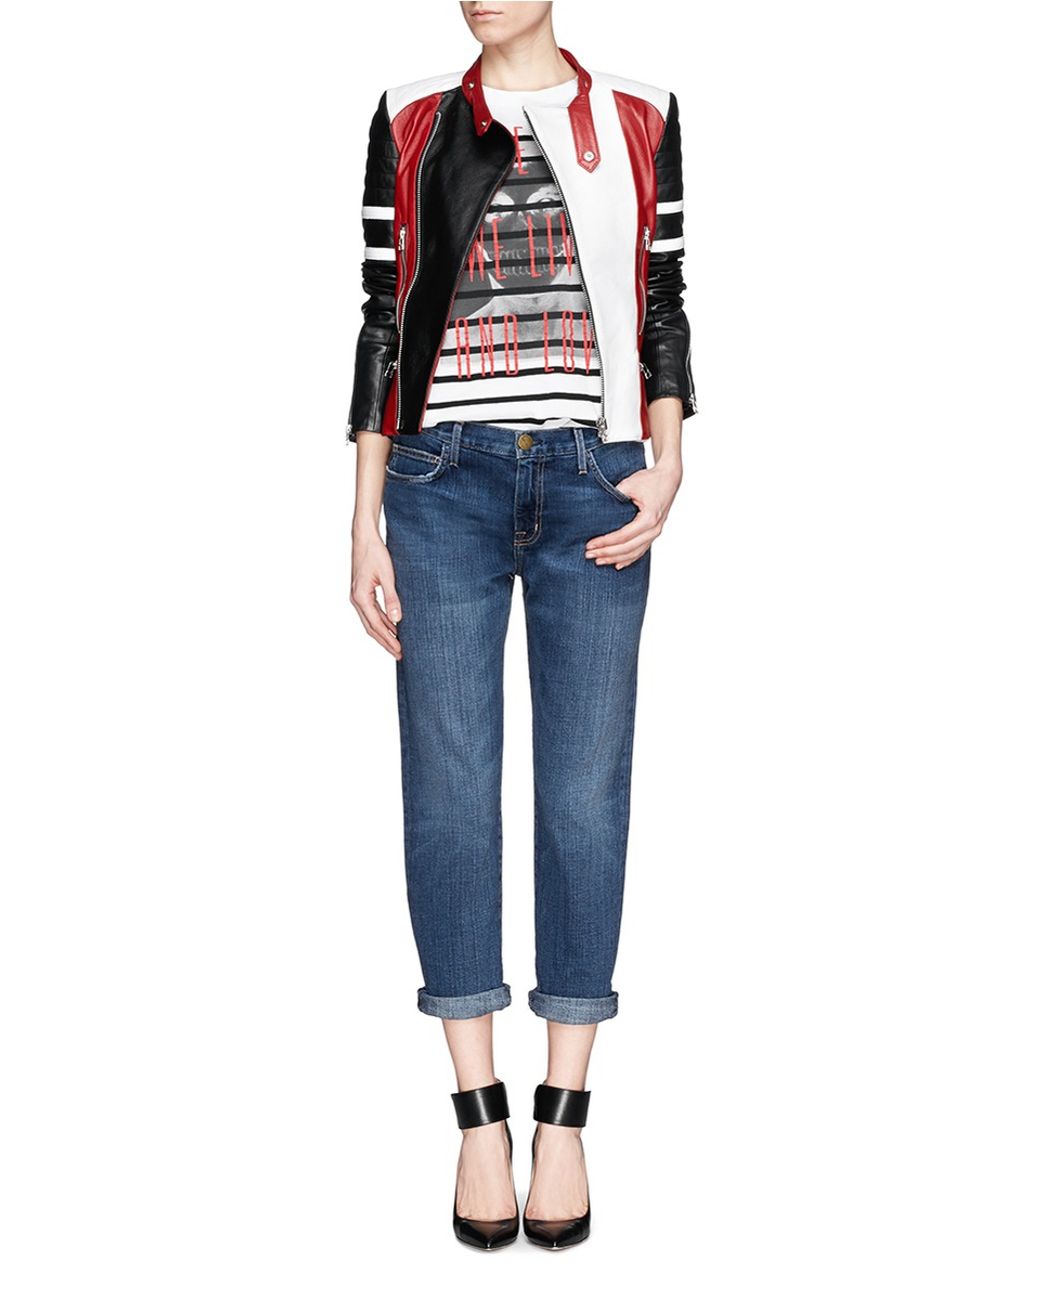 Each x Other X Jeremy Kost Print Lining Leather Jacket in Red 